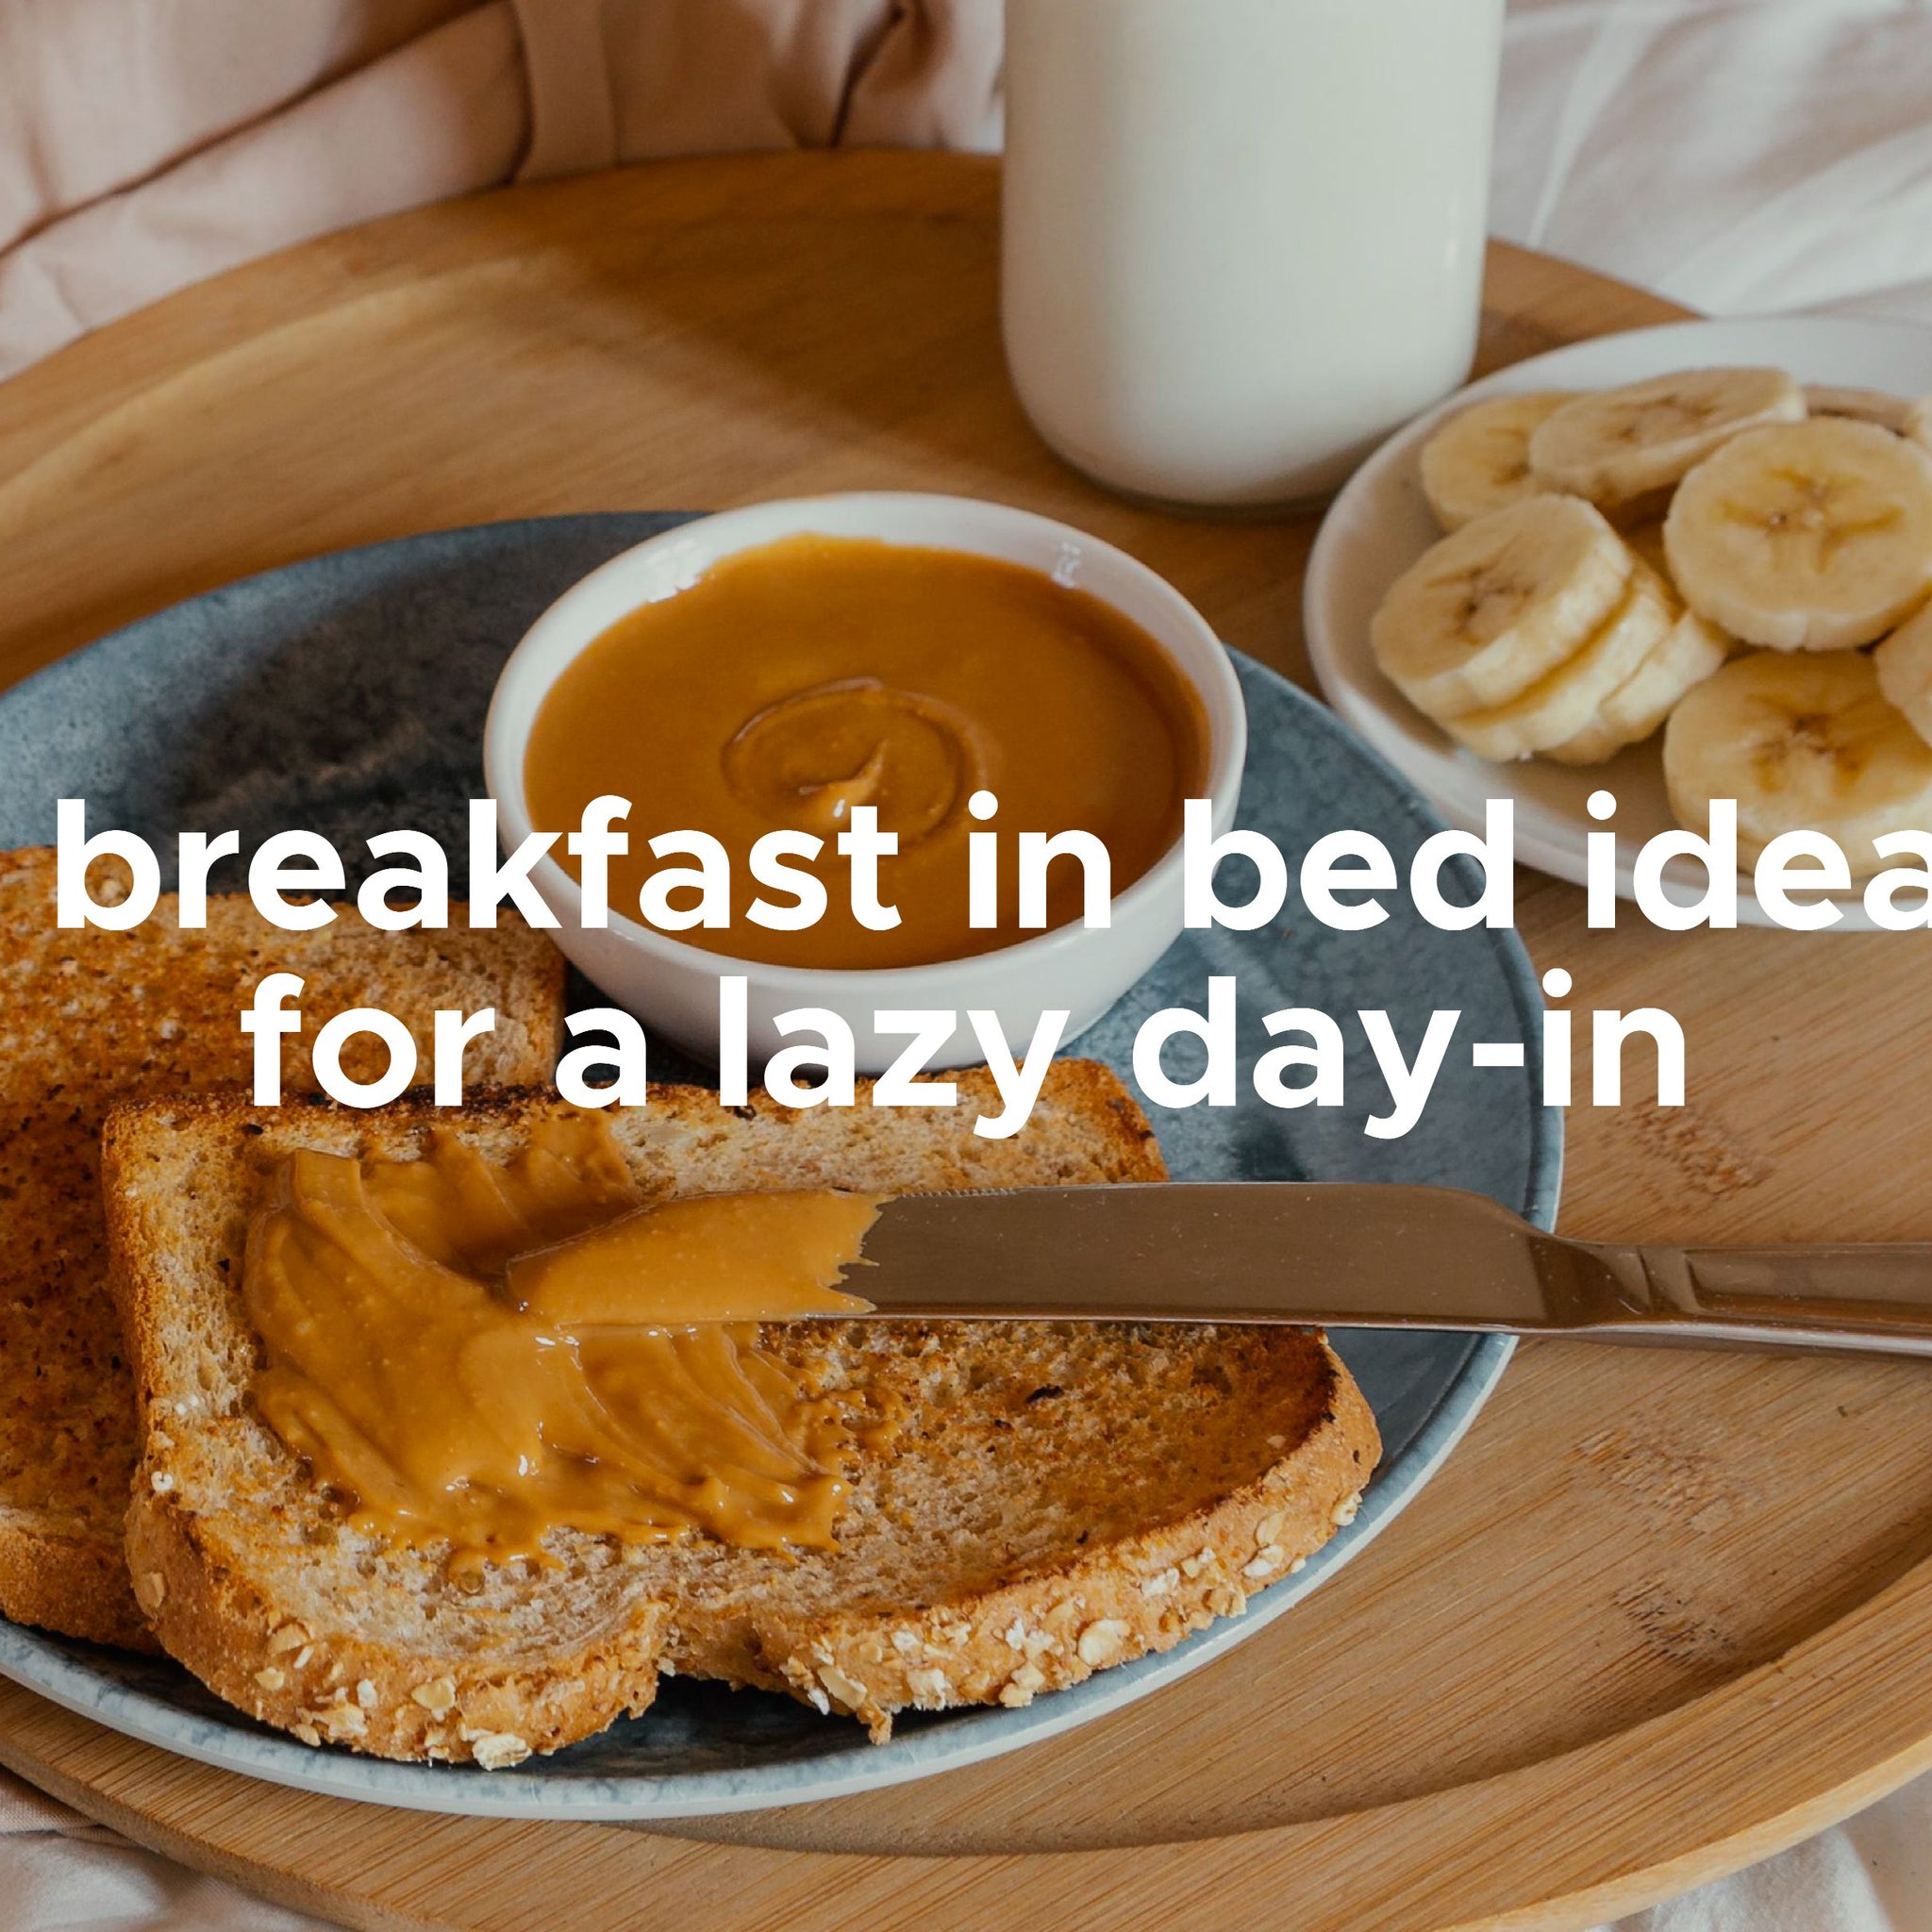 4 breakfast in bed ideas for a lazy day-in